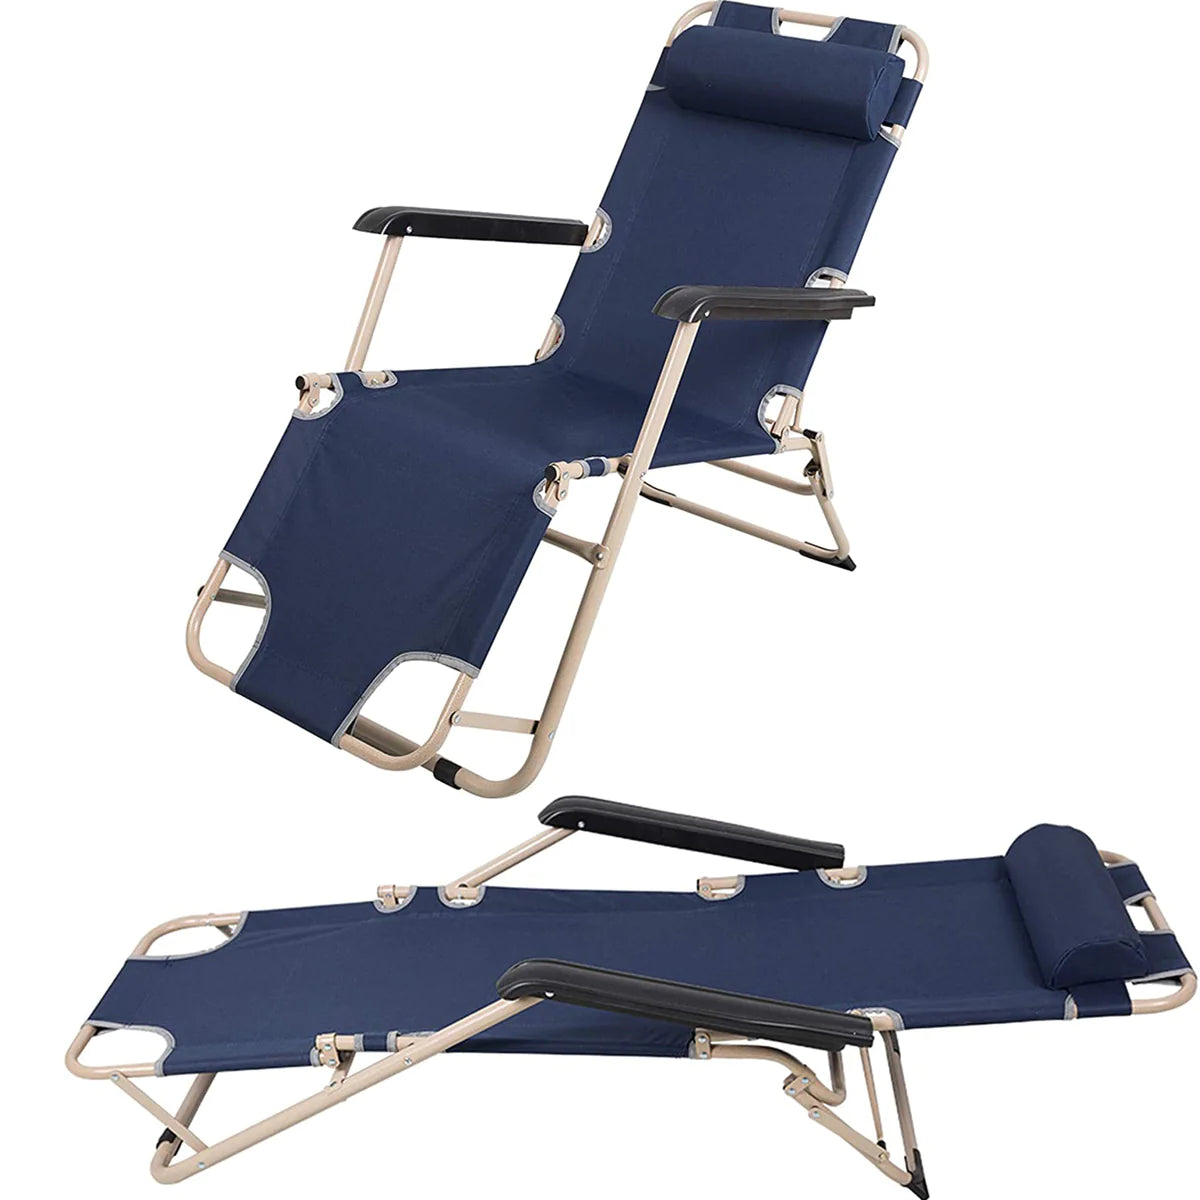 2 Sets of Collapsible Lounge Chair Outdoor Pool Lounge Chair | karmasfar.us